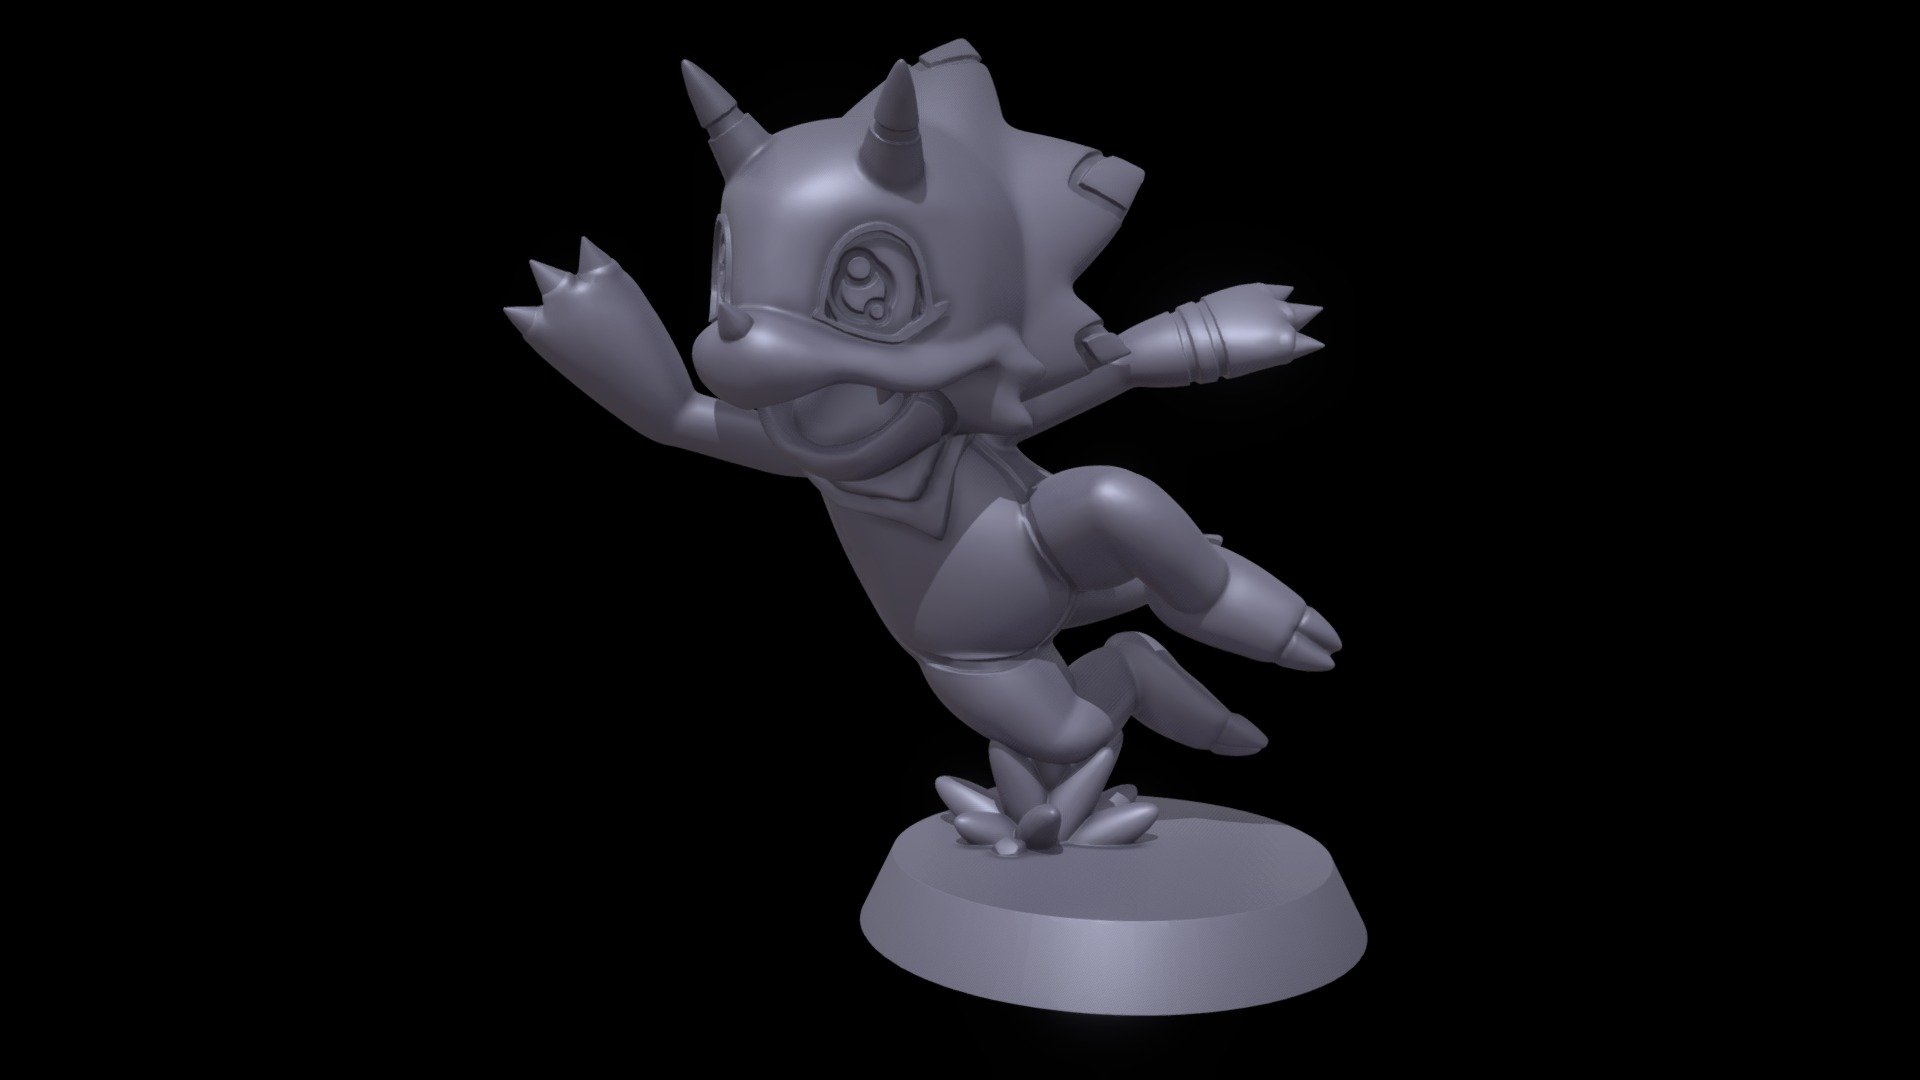 Gammamon ready to print!

Here we have the protagonist of Digimon Ghost Game. The file consists of two models, so you can print it to your liking according to your needs:

A model with all the color changes in relief (in case it helps you when painting, or in case you don't want to paint it but you want it to stand out)

A model with flat color changes (in case you dare to paint it freehand)

Enjoy them! - 🔥 GAMMAMON 🔥 STLs [Digimon Ghost Game] - Buy Royalty Free 3D model by DiegoBlancoAres 3d model